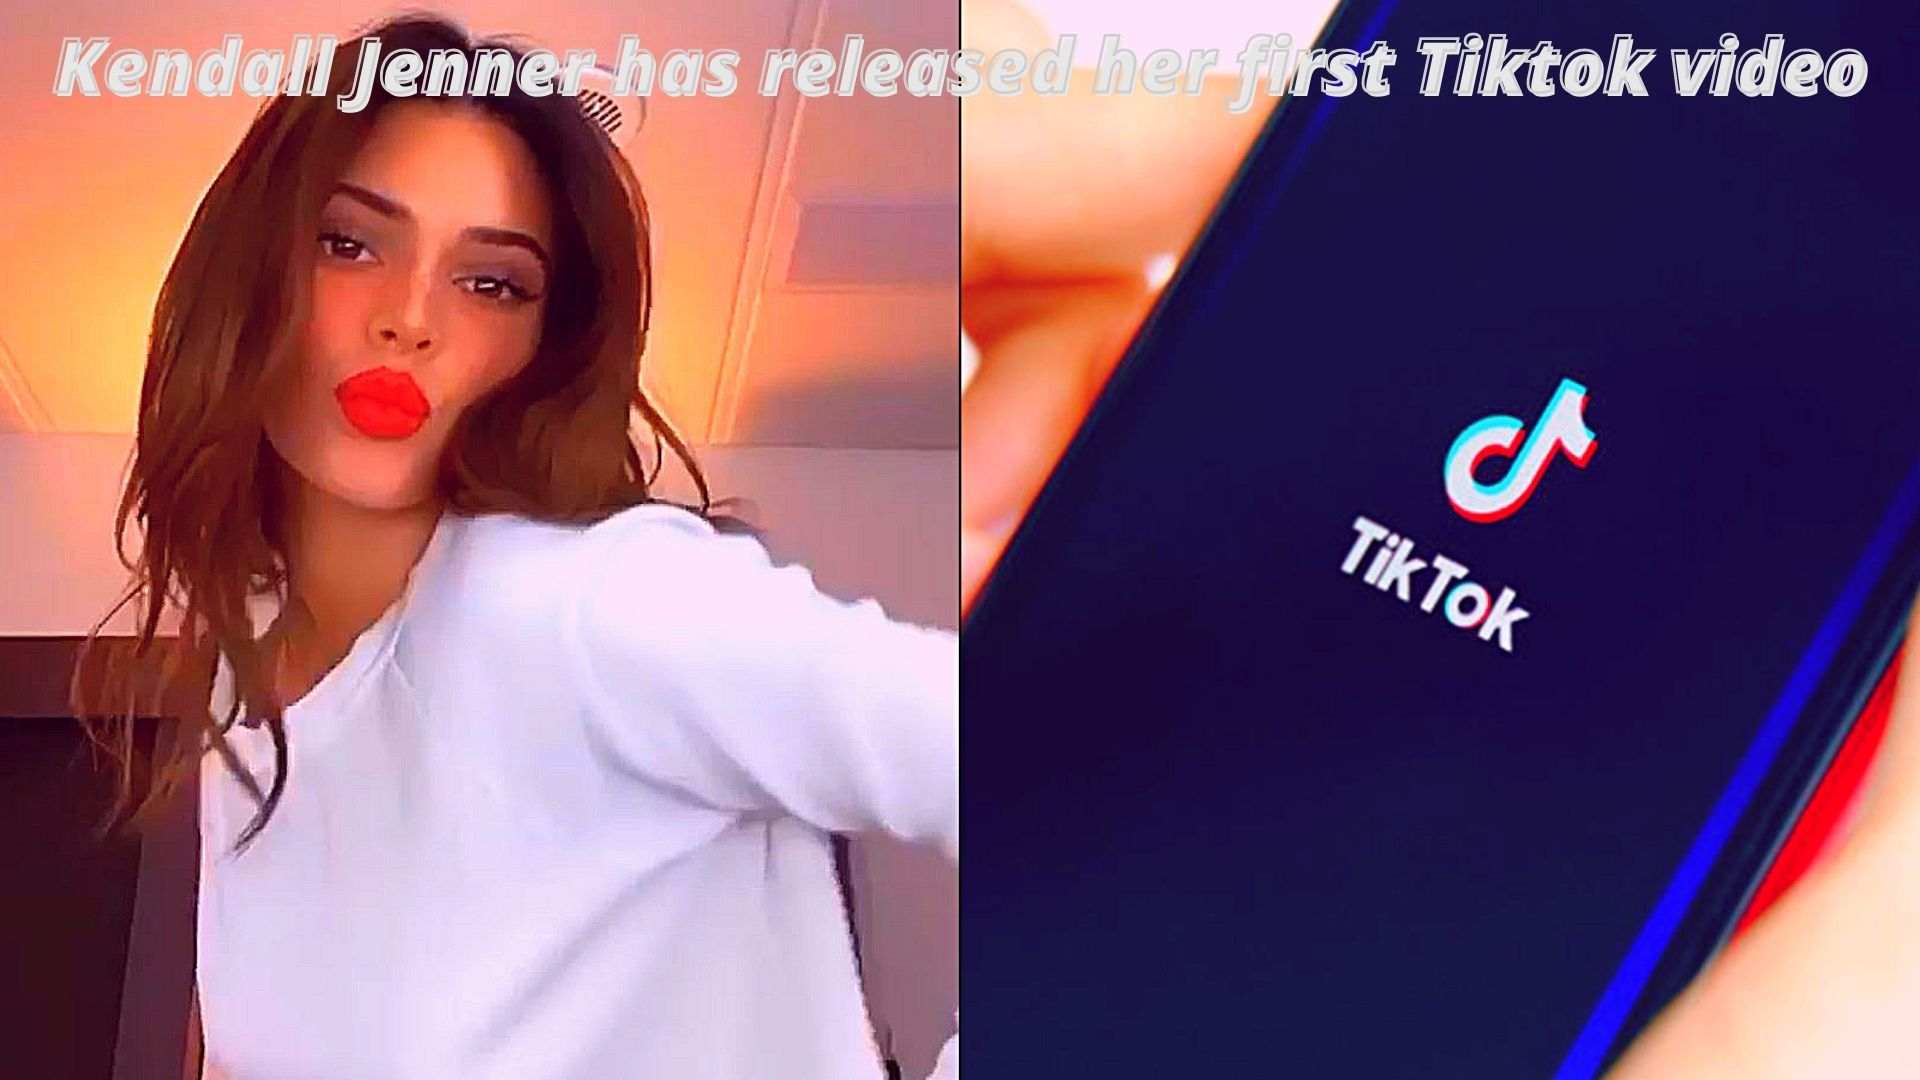 Kendall Jenner has released her first Tiktok video